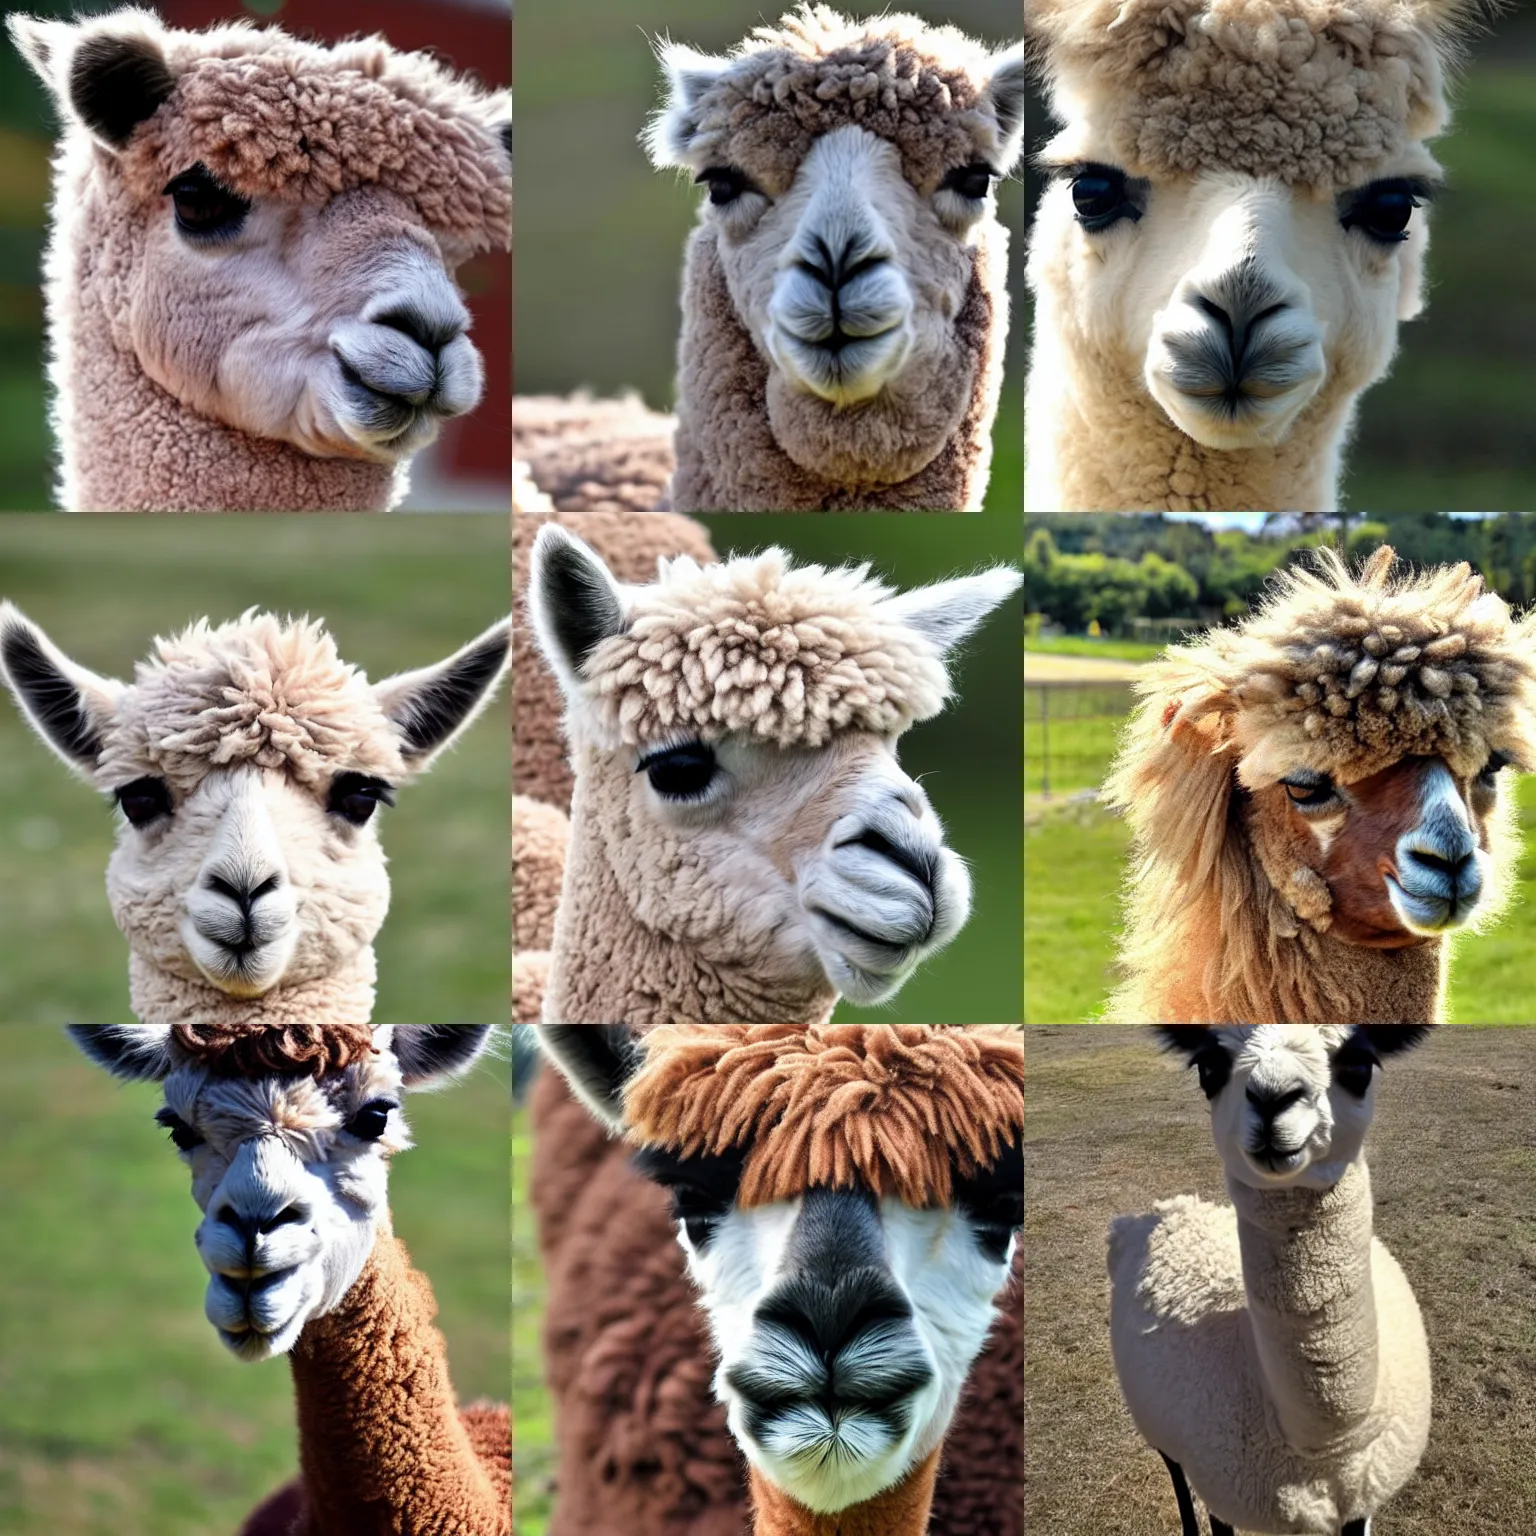 Prompt: an adorable alpaca stares knowingly